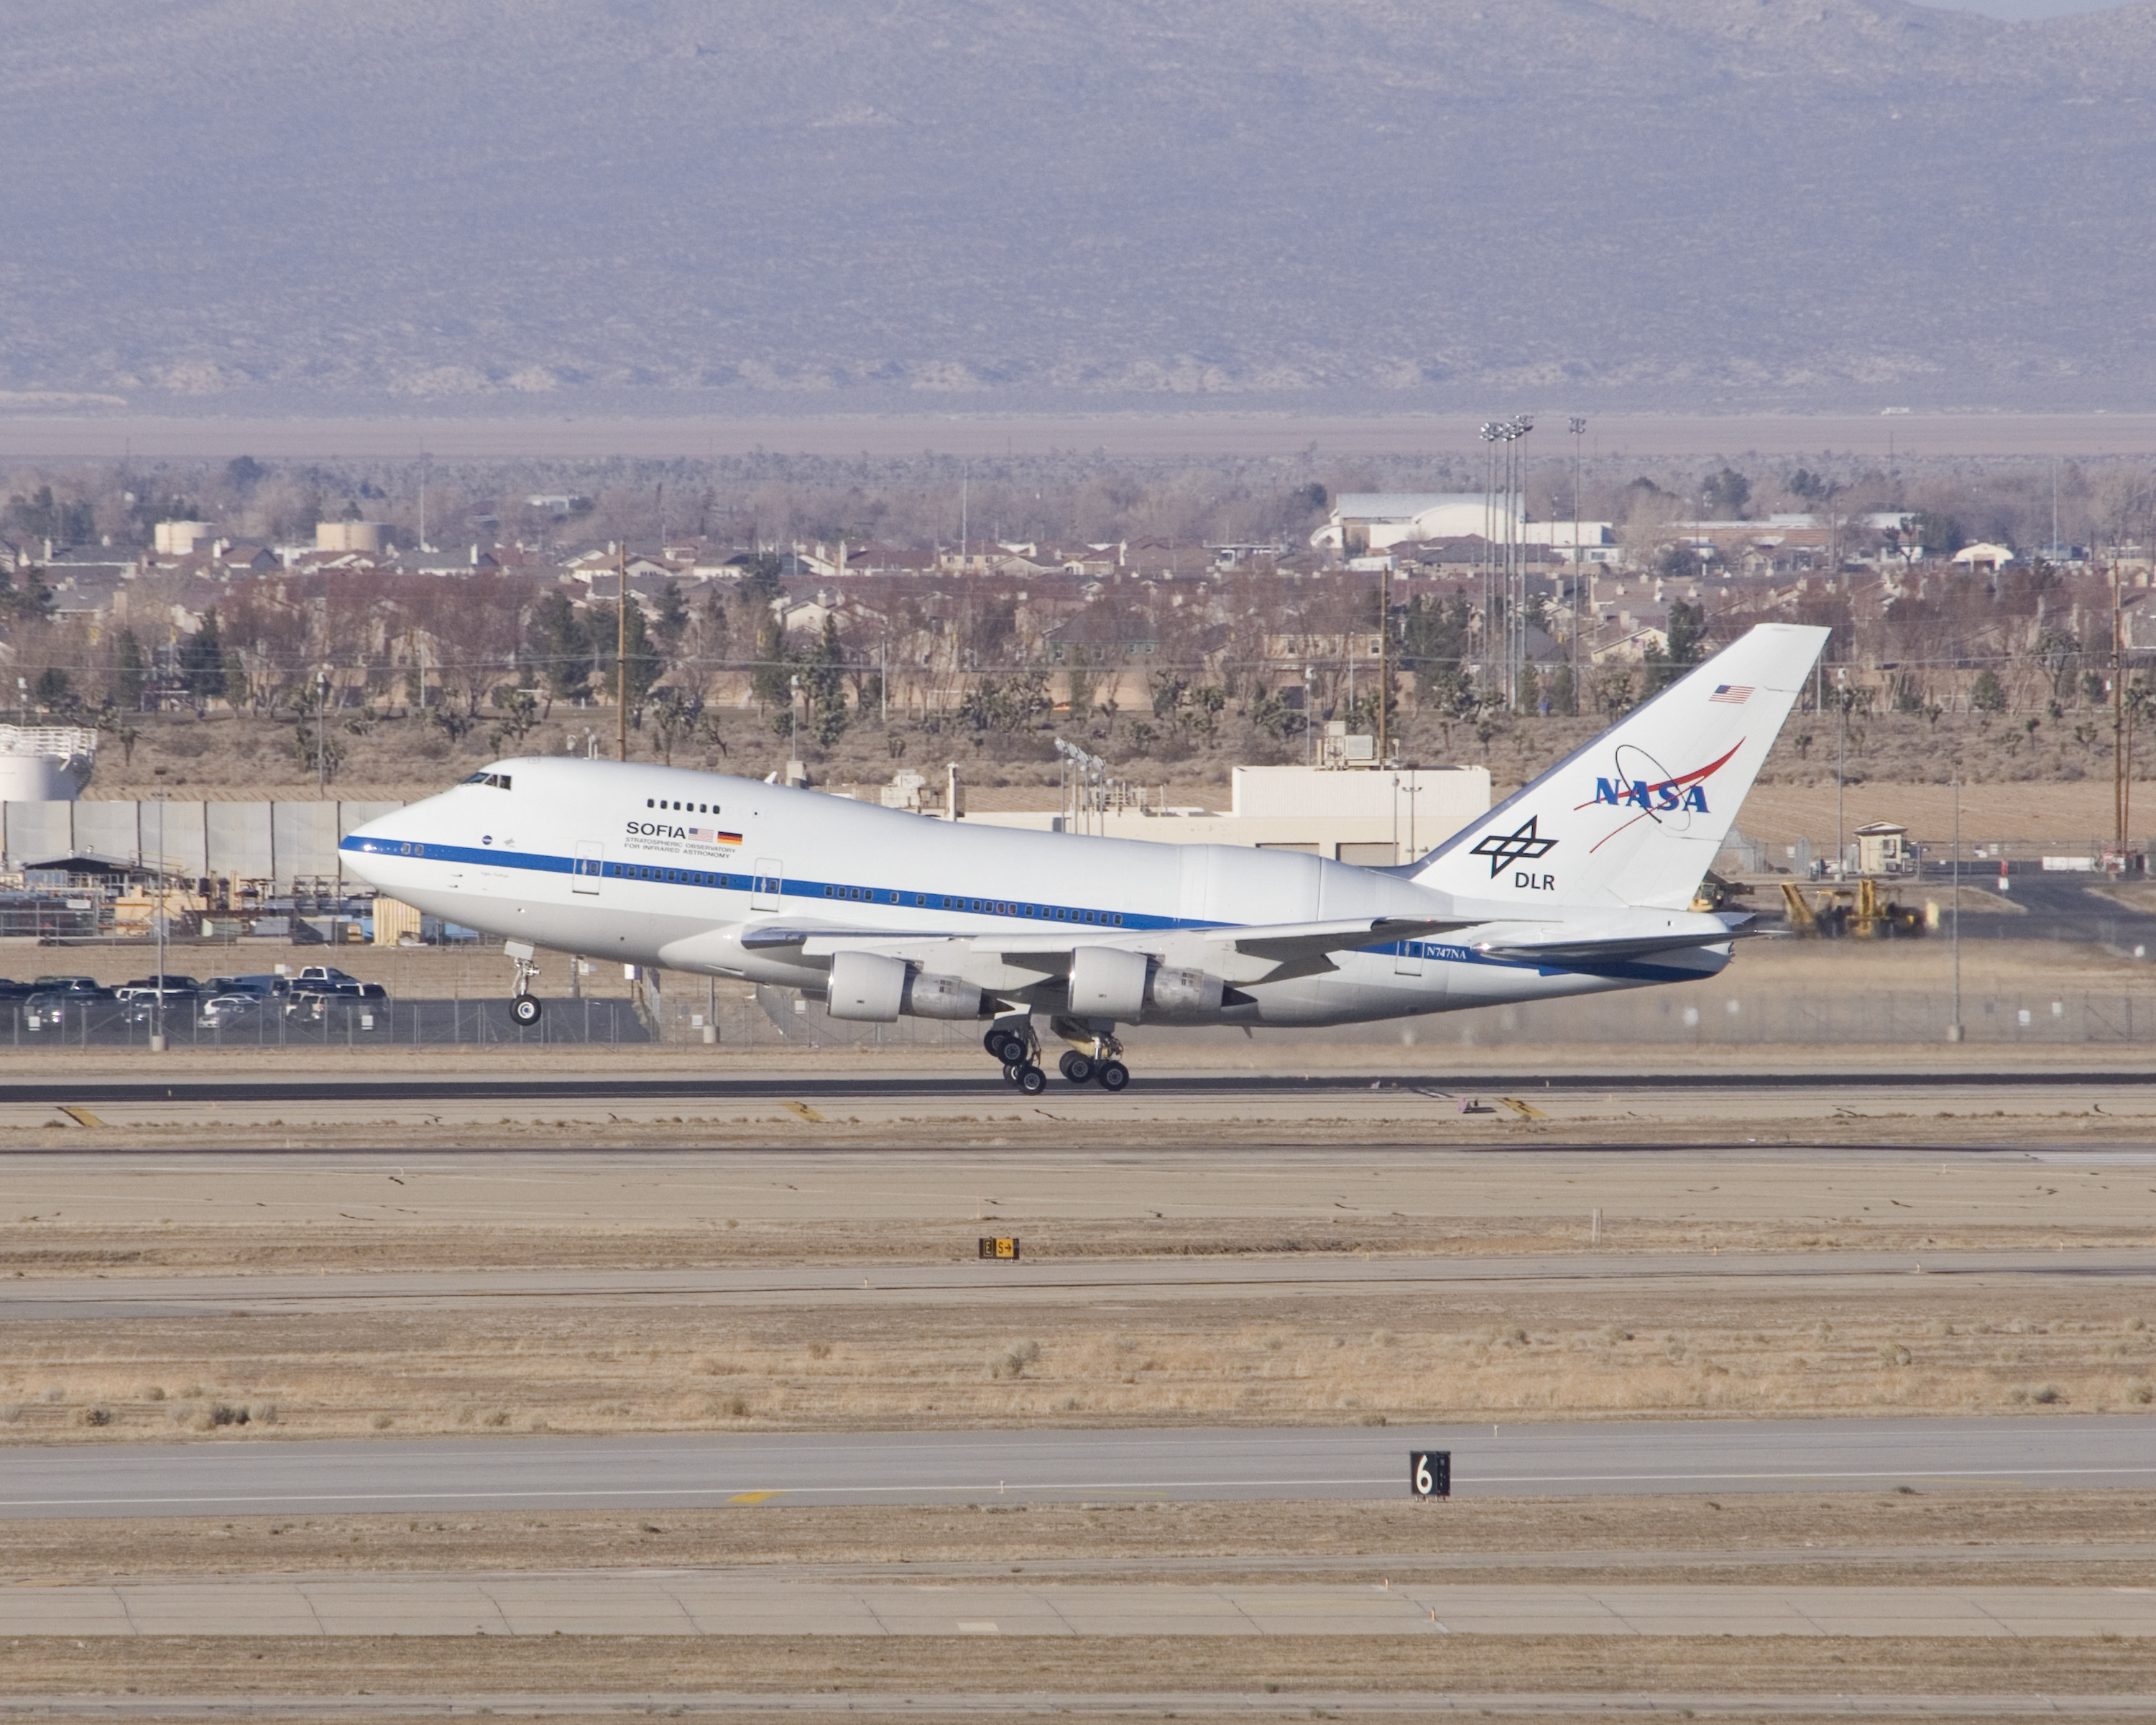 SOFIA lands at Air Force Plant 42